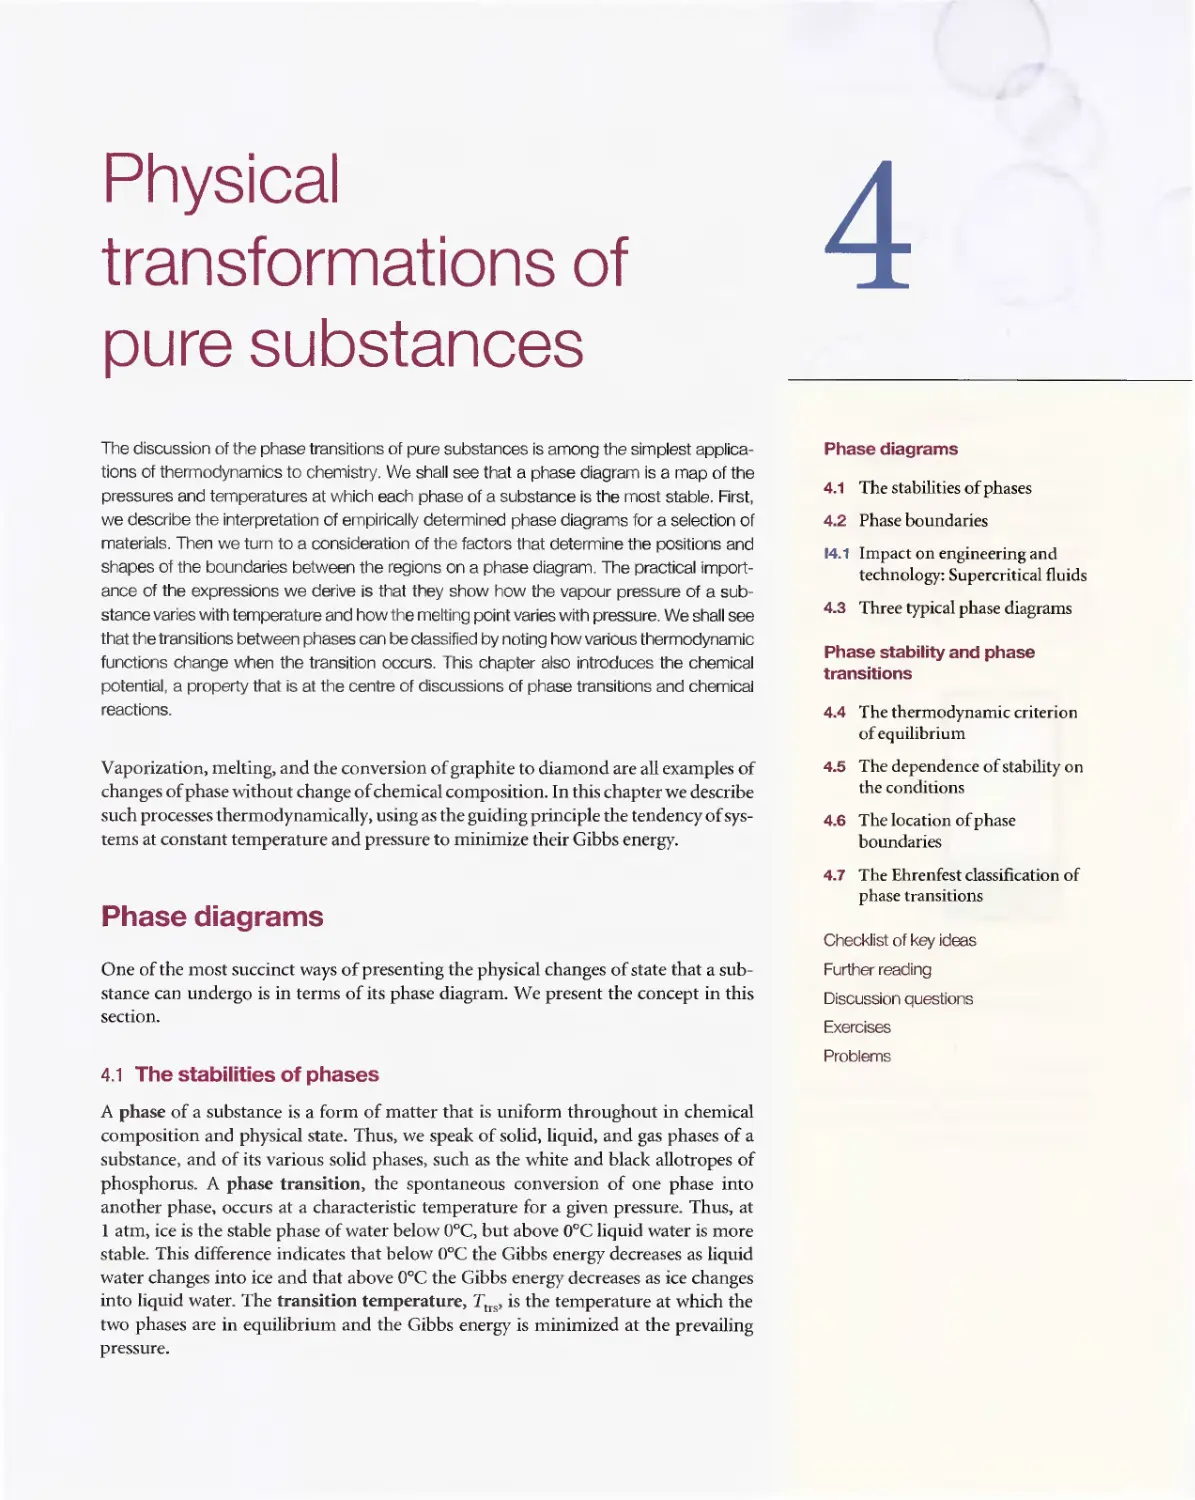 4 - Physical transformations of pure substances